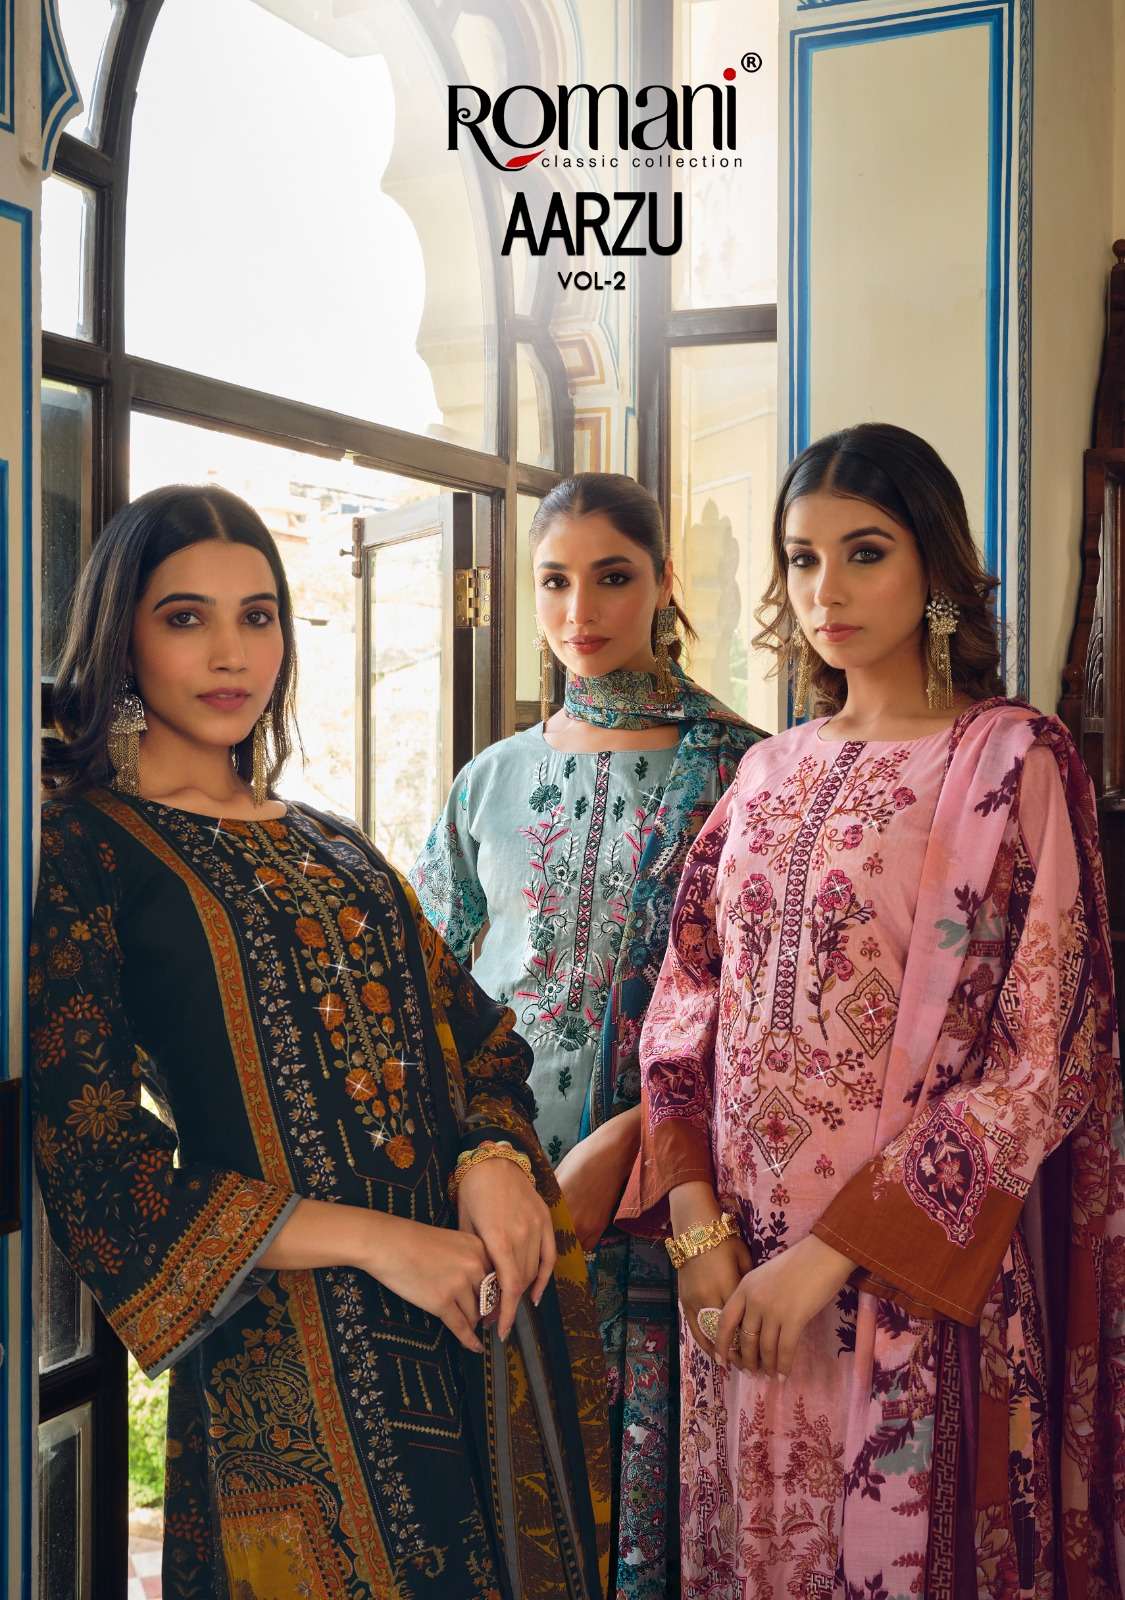 Tawakkal Mehroz Luxury Cotton Collection 4 Designer Dress Material  Wholesale collection in india